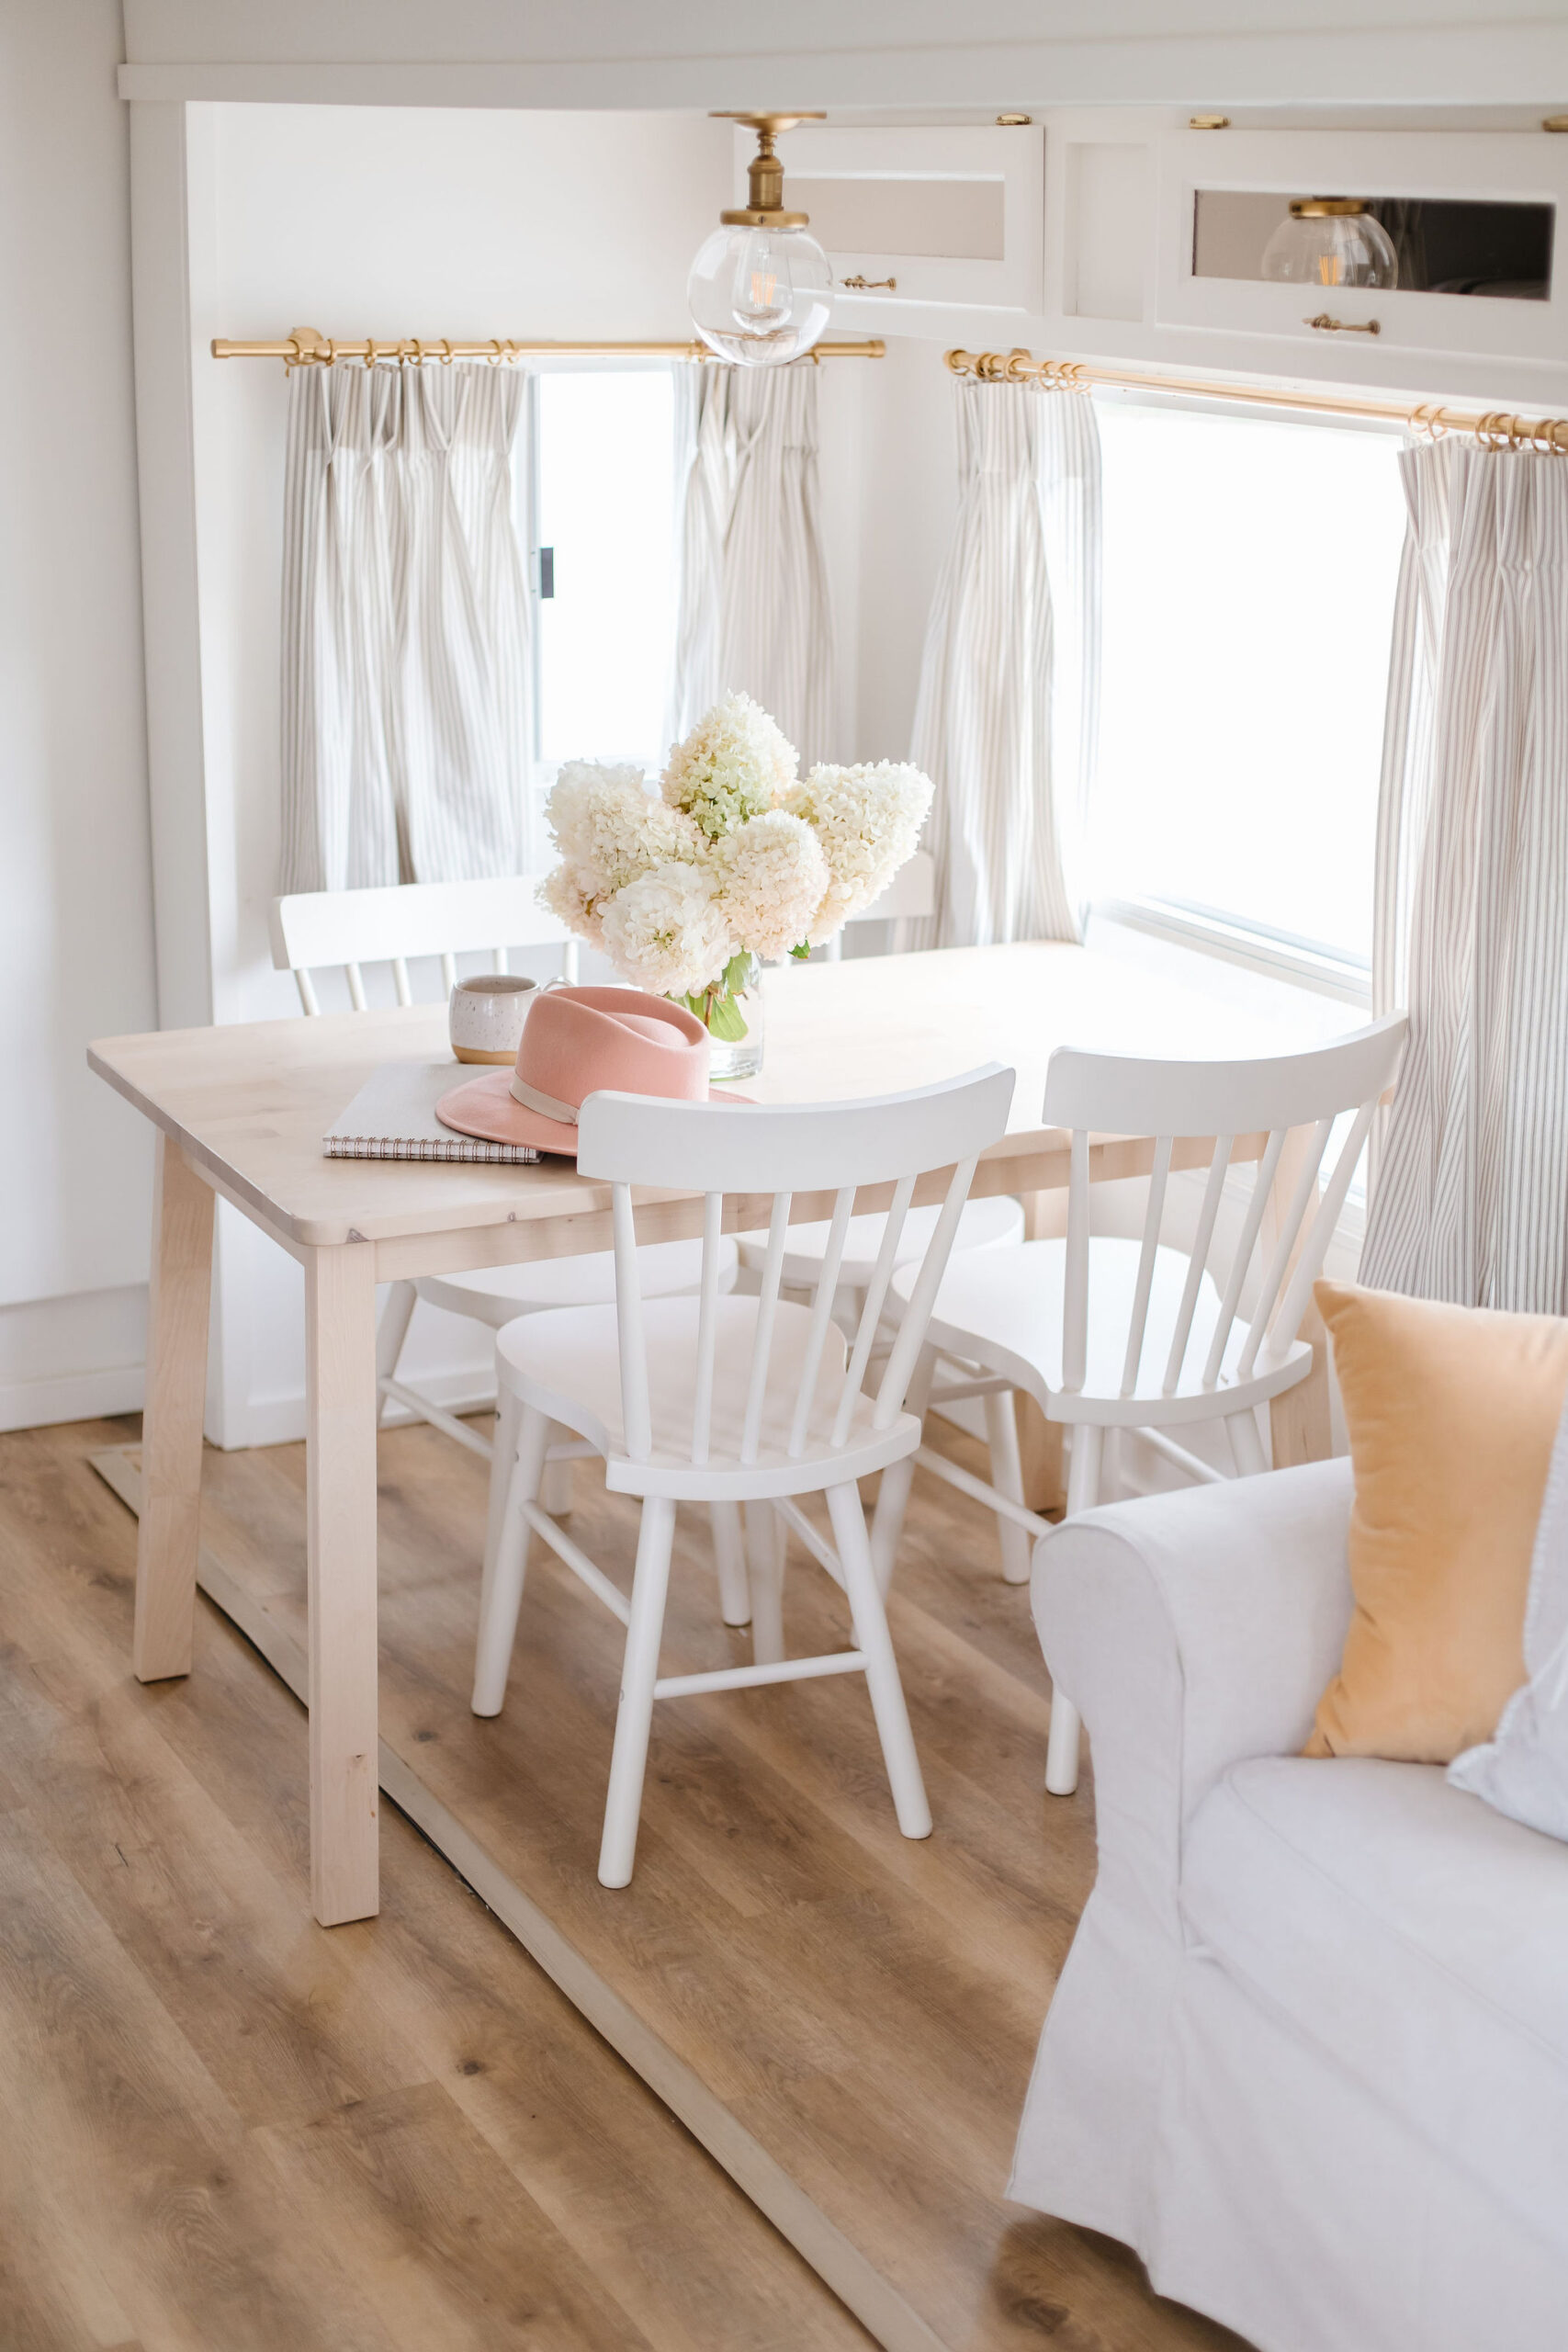 Our Camper Reveal Fraiche Living dining table ikea